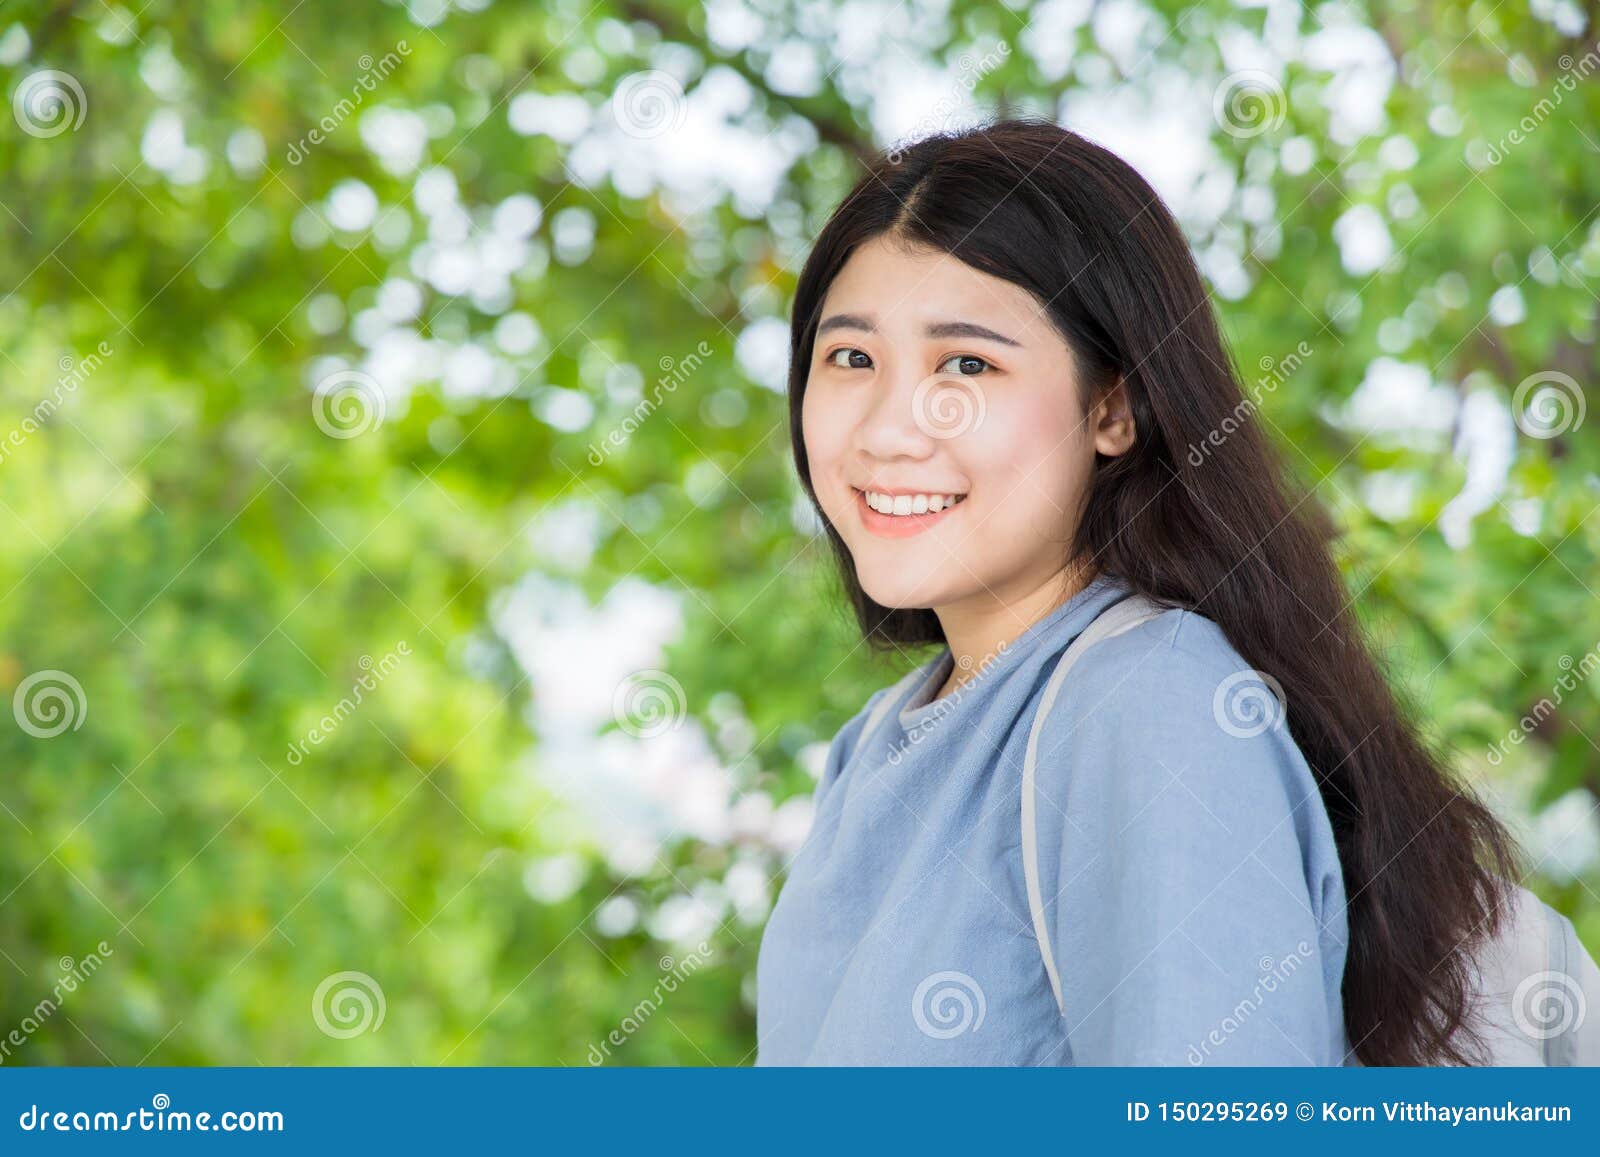 Asian Girl Teen Cute Healthy Smiling On Green Nature Background With Space Stock Image Image Of Expression Happy